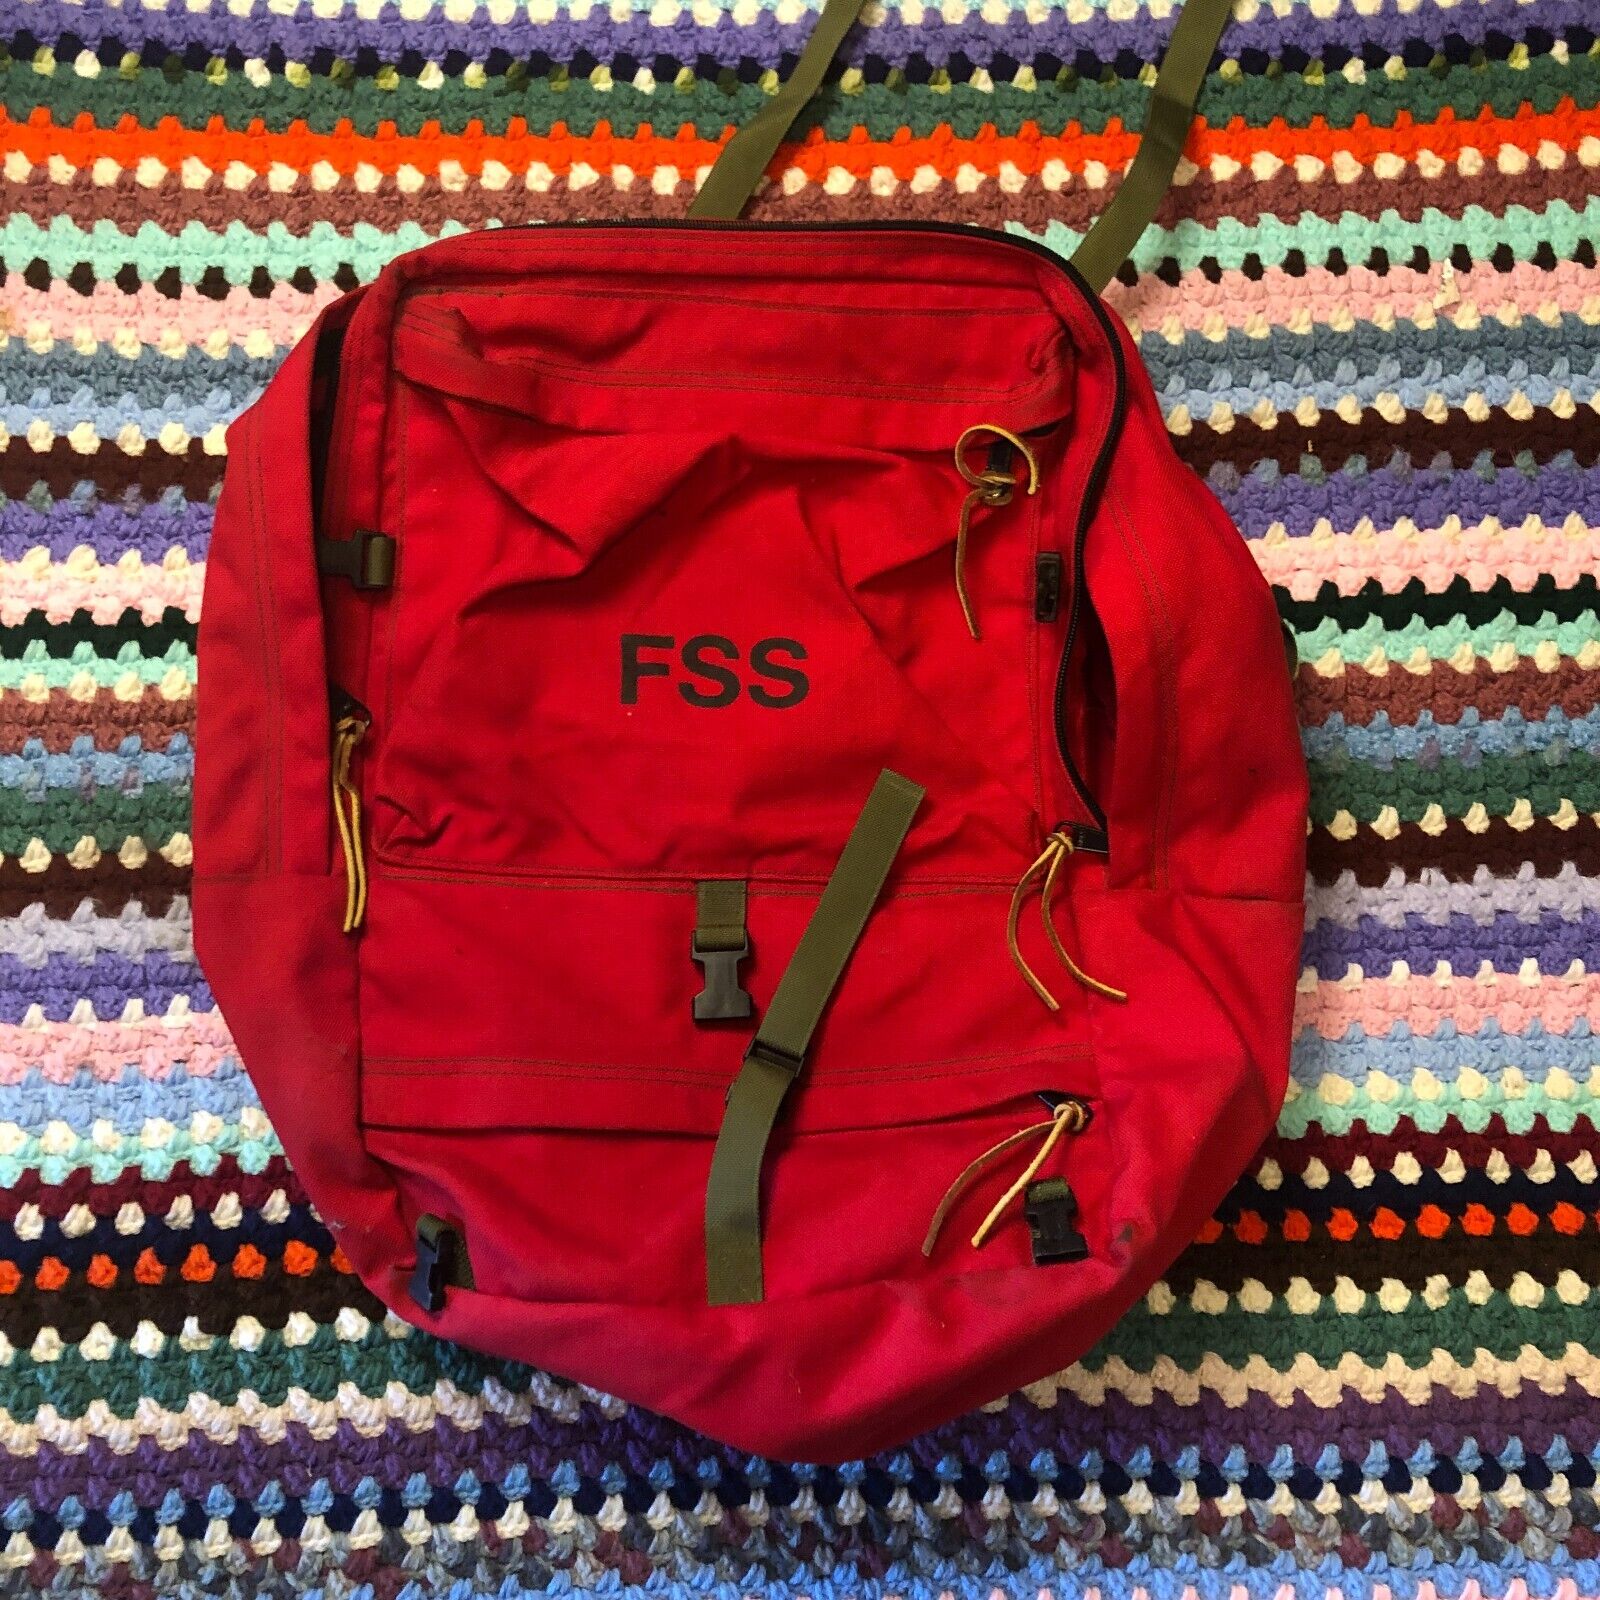 Red Fss Us Forest Service Forestry Wildland Firefighter Large Gear Bag Backpack